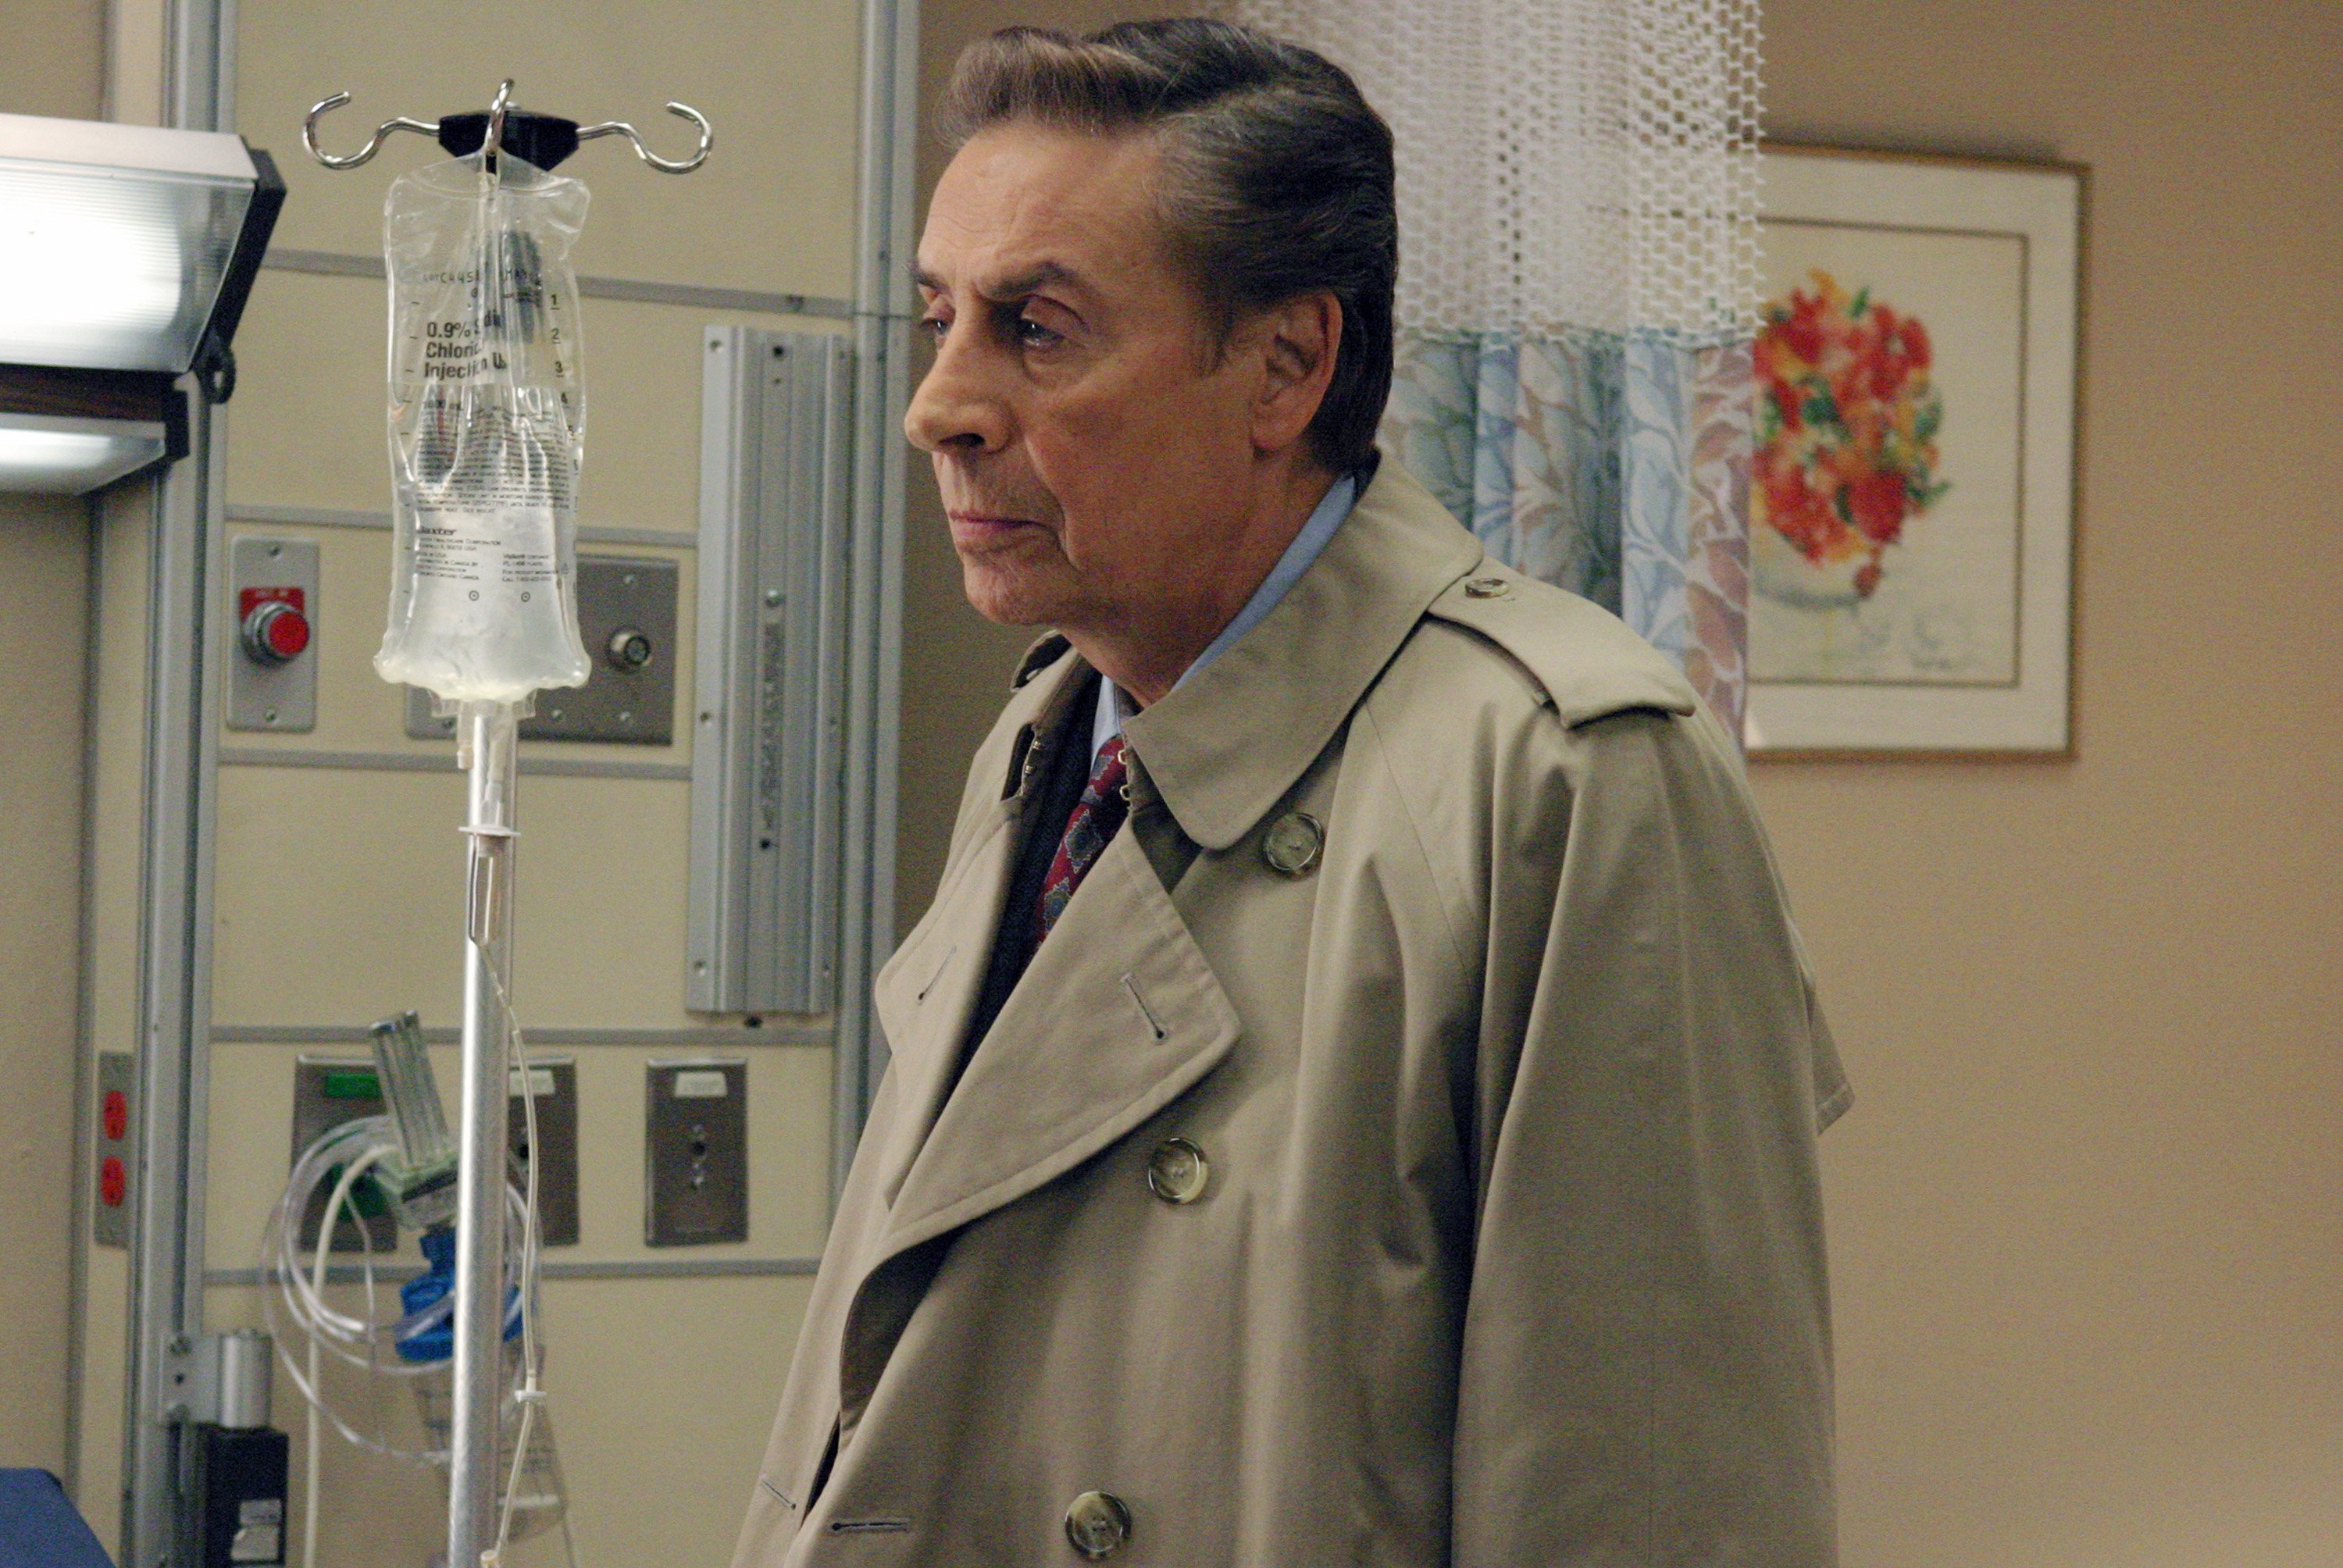 Jerry Orbach as Detective Lennie Briscoe on "Law & Order" on April 28, 2004 | Source: Getty Images